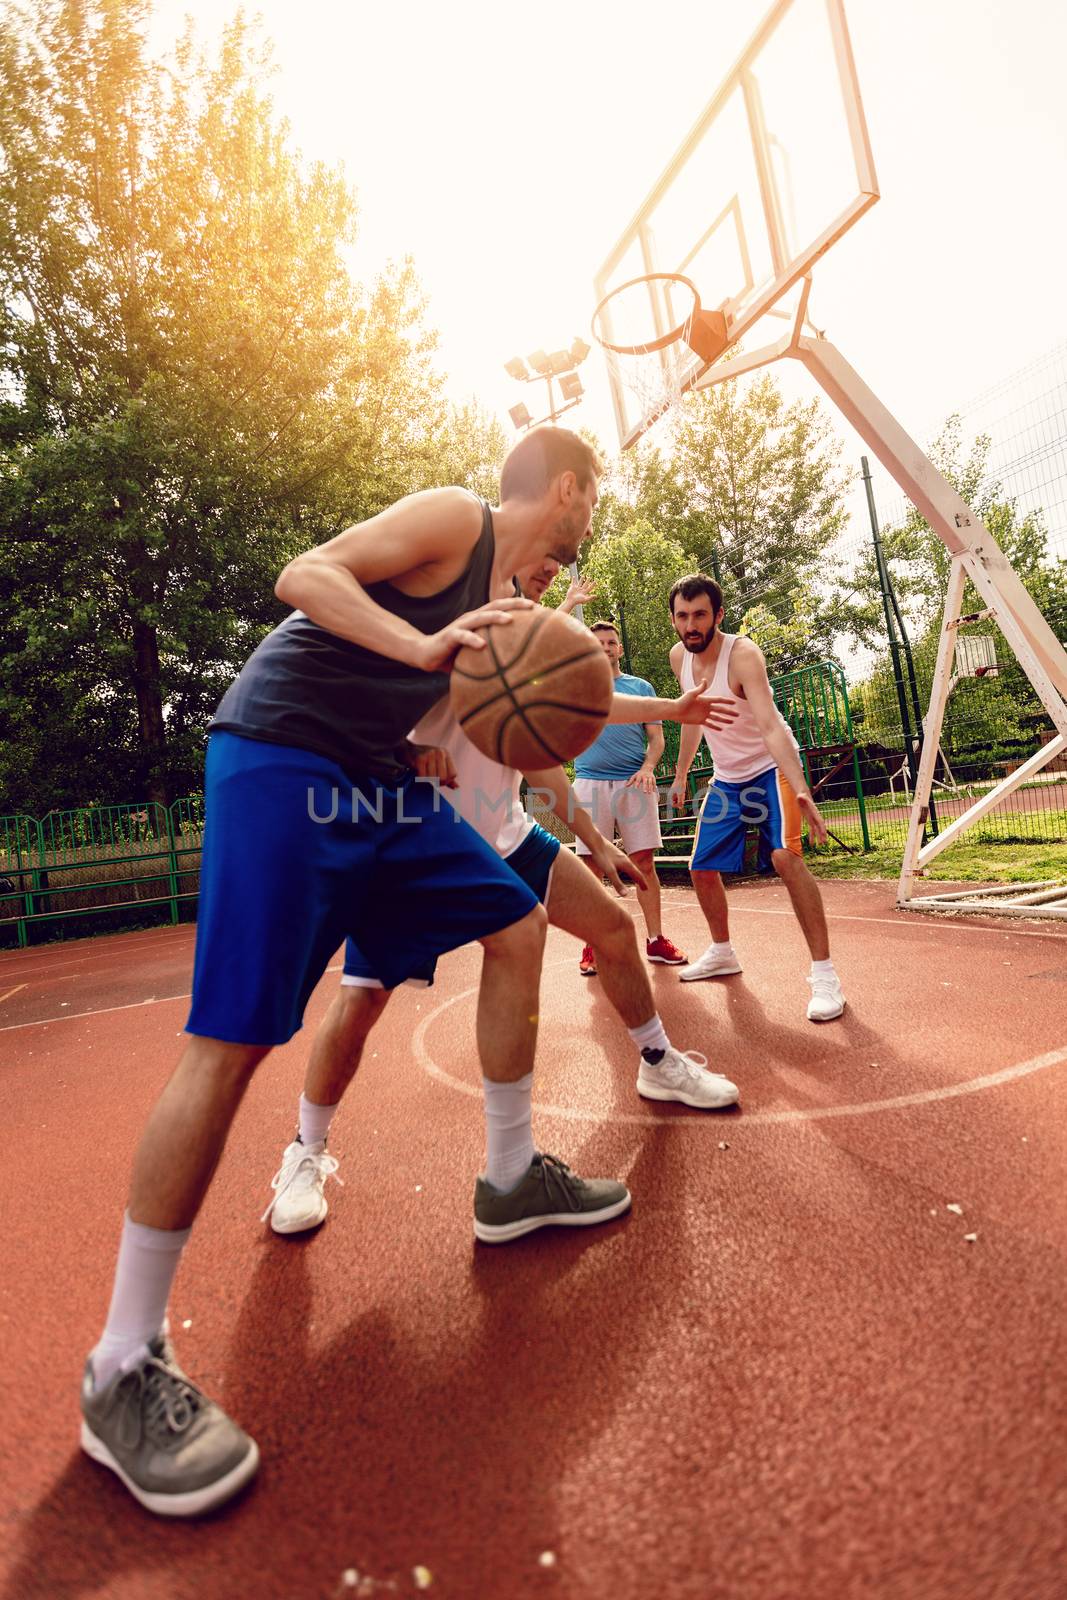 Four basketball players have a training outdoor. They are playing and making action together.